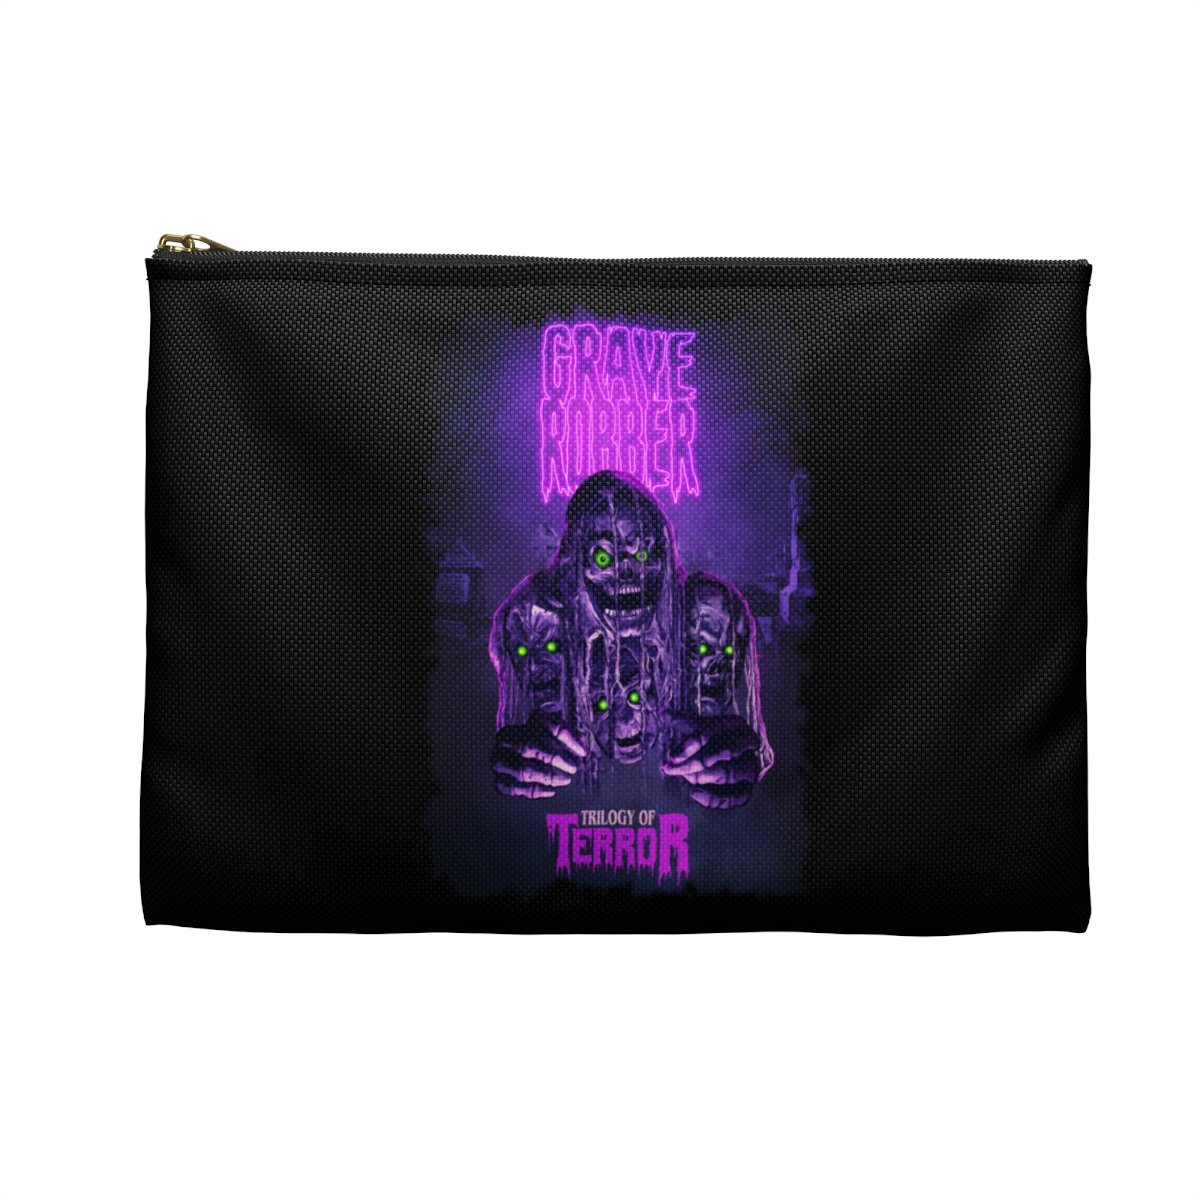 Grave Robber – Trilogy of Terror Accessory Pouch